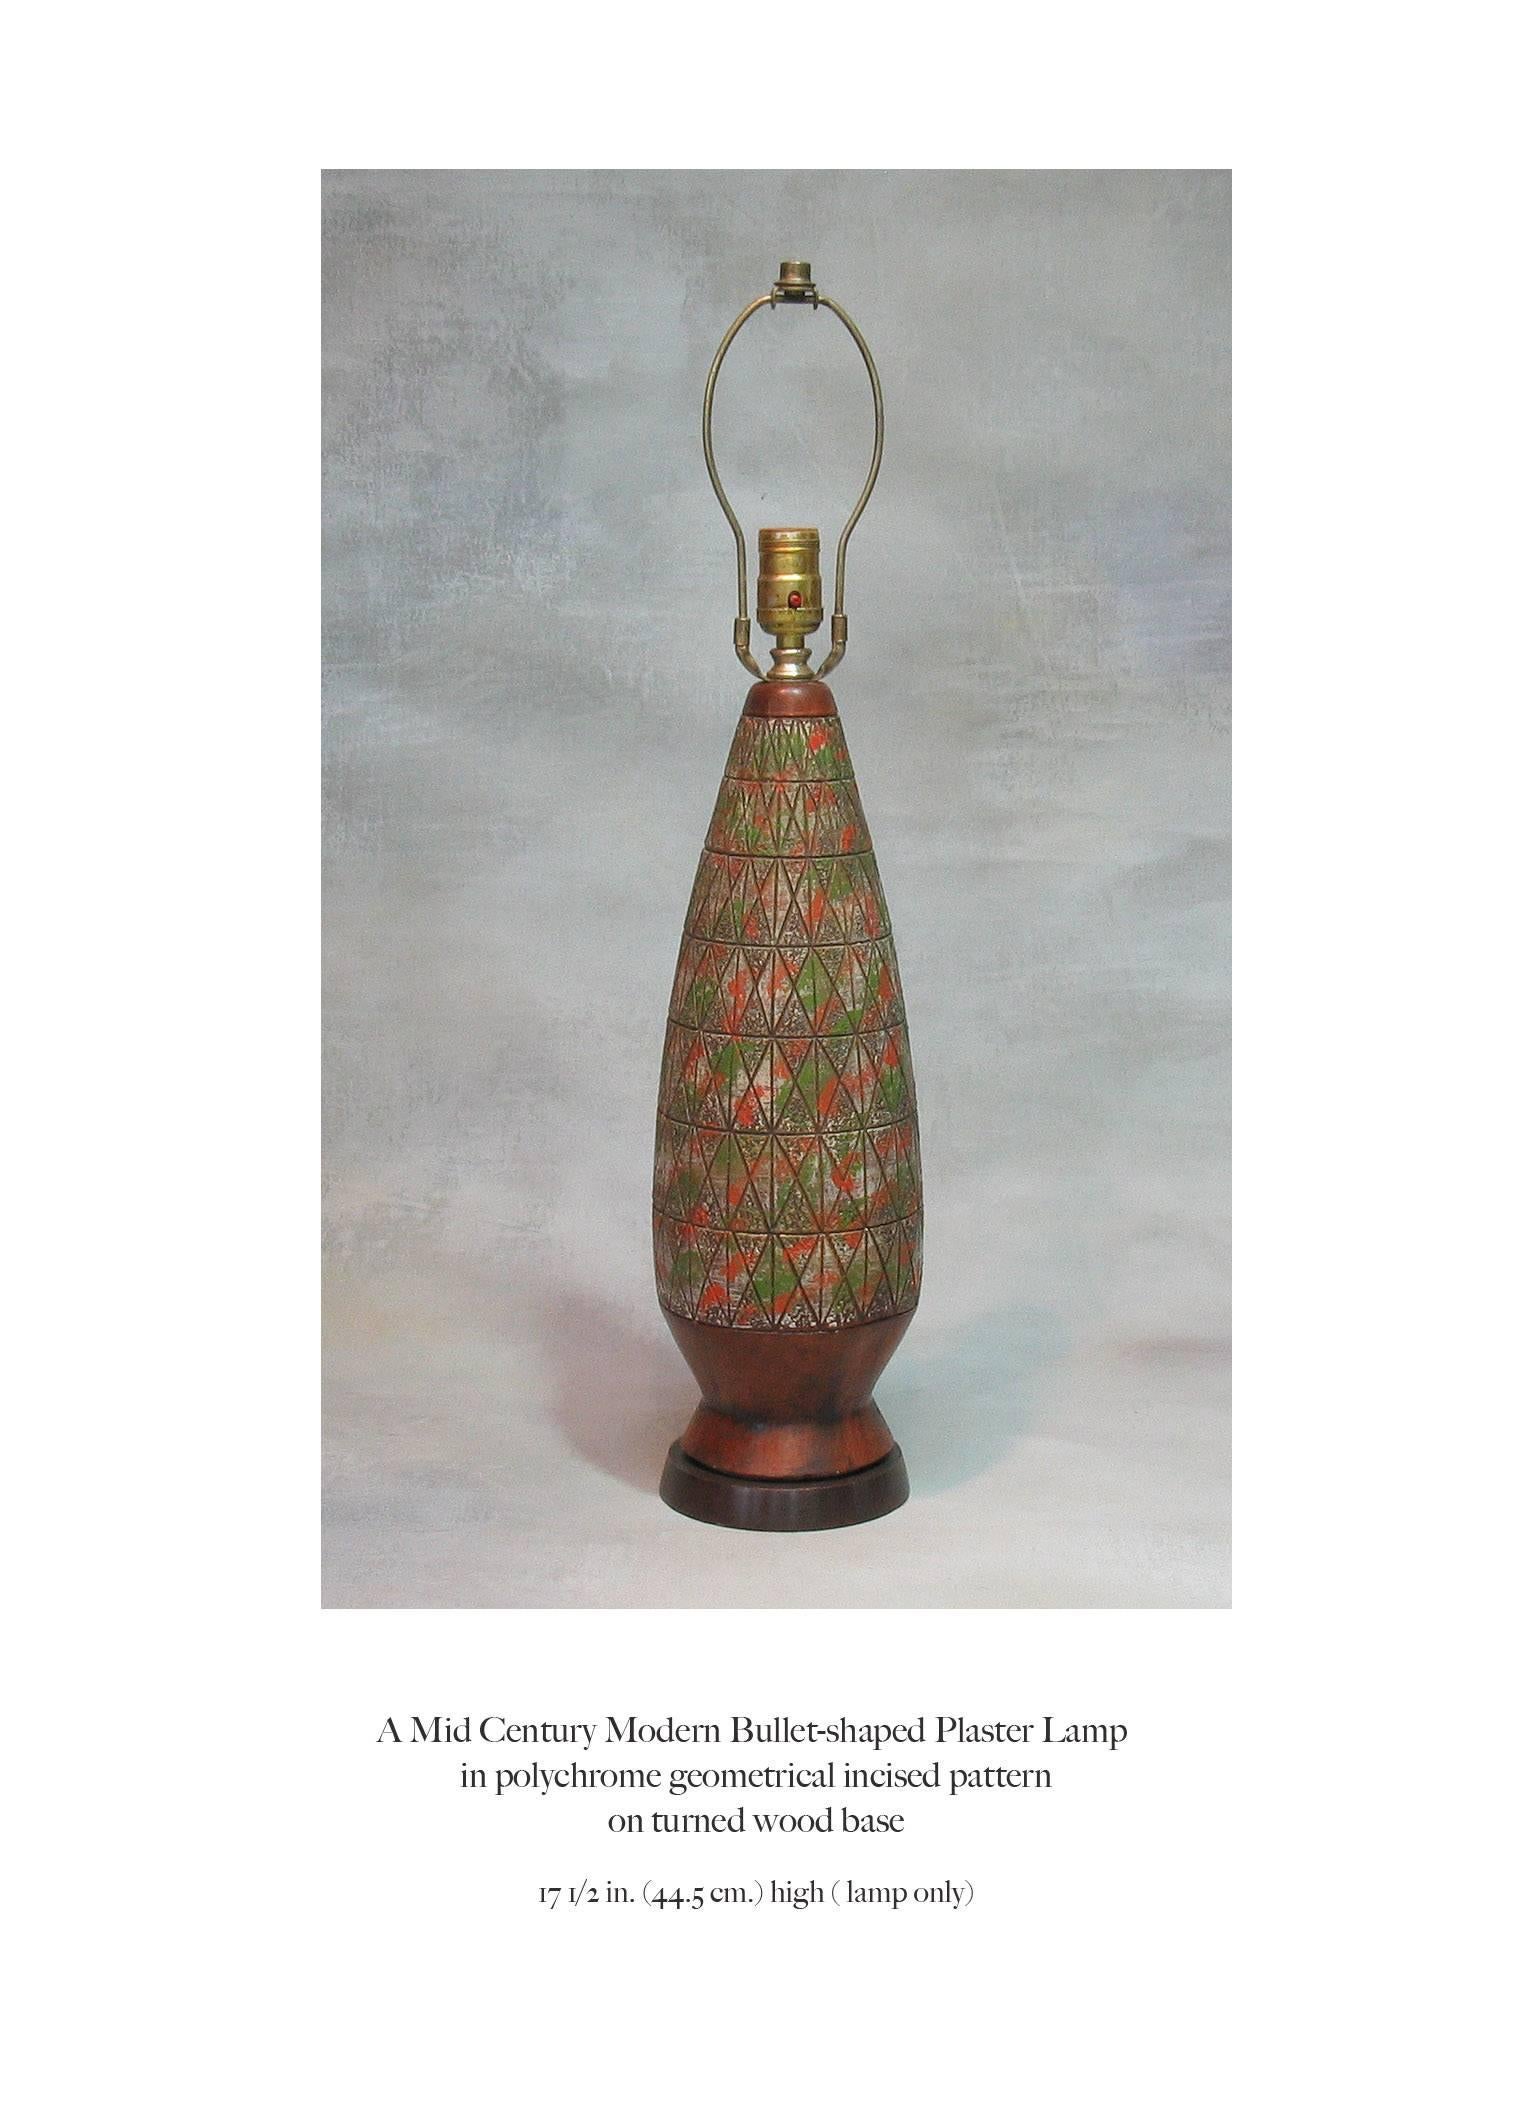 A Mid-Century Modern bullet shaped plaster lamp, in a polychrome geometrical incised pattern, mounted on a wood base. Burnt orange, green and silver grey colors. The lamp measures 17 1/2" inches high x 5" inches in diameter, circa 1960s.